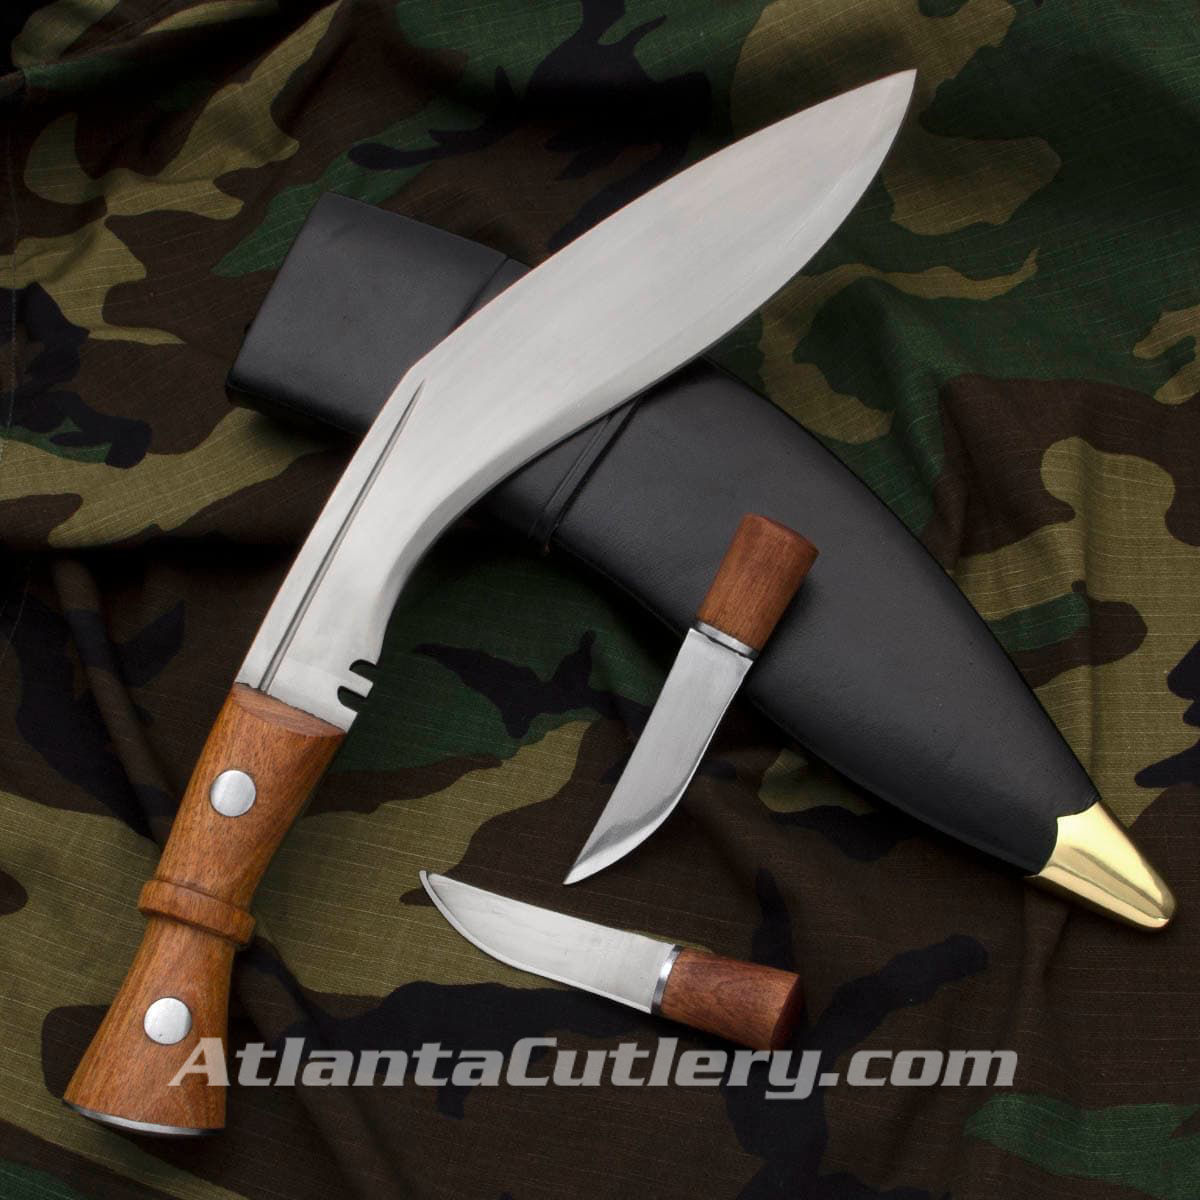 Military issue Gurkha Regimental Kukri has sharp 1/4" blade and scabbard with 2 accessory knives